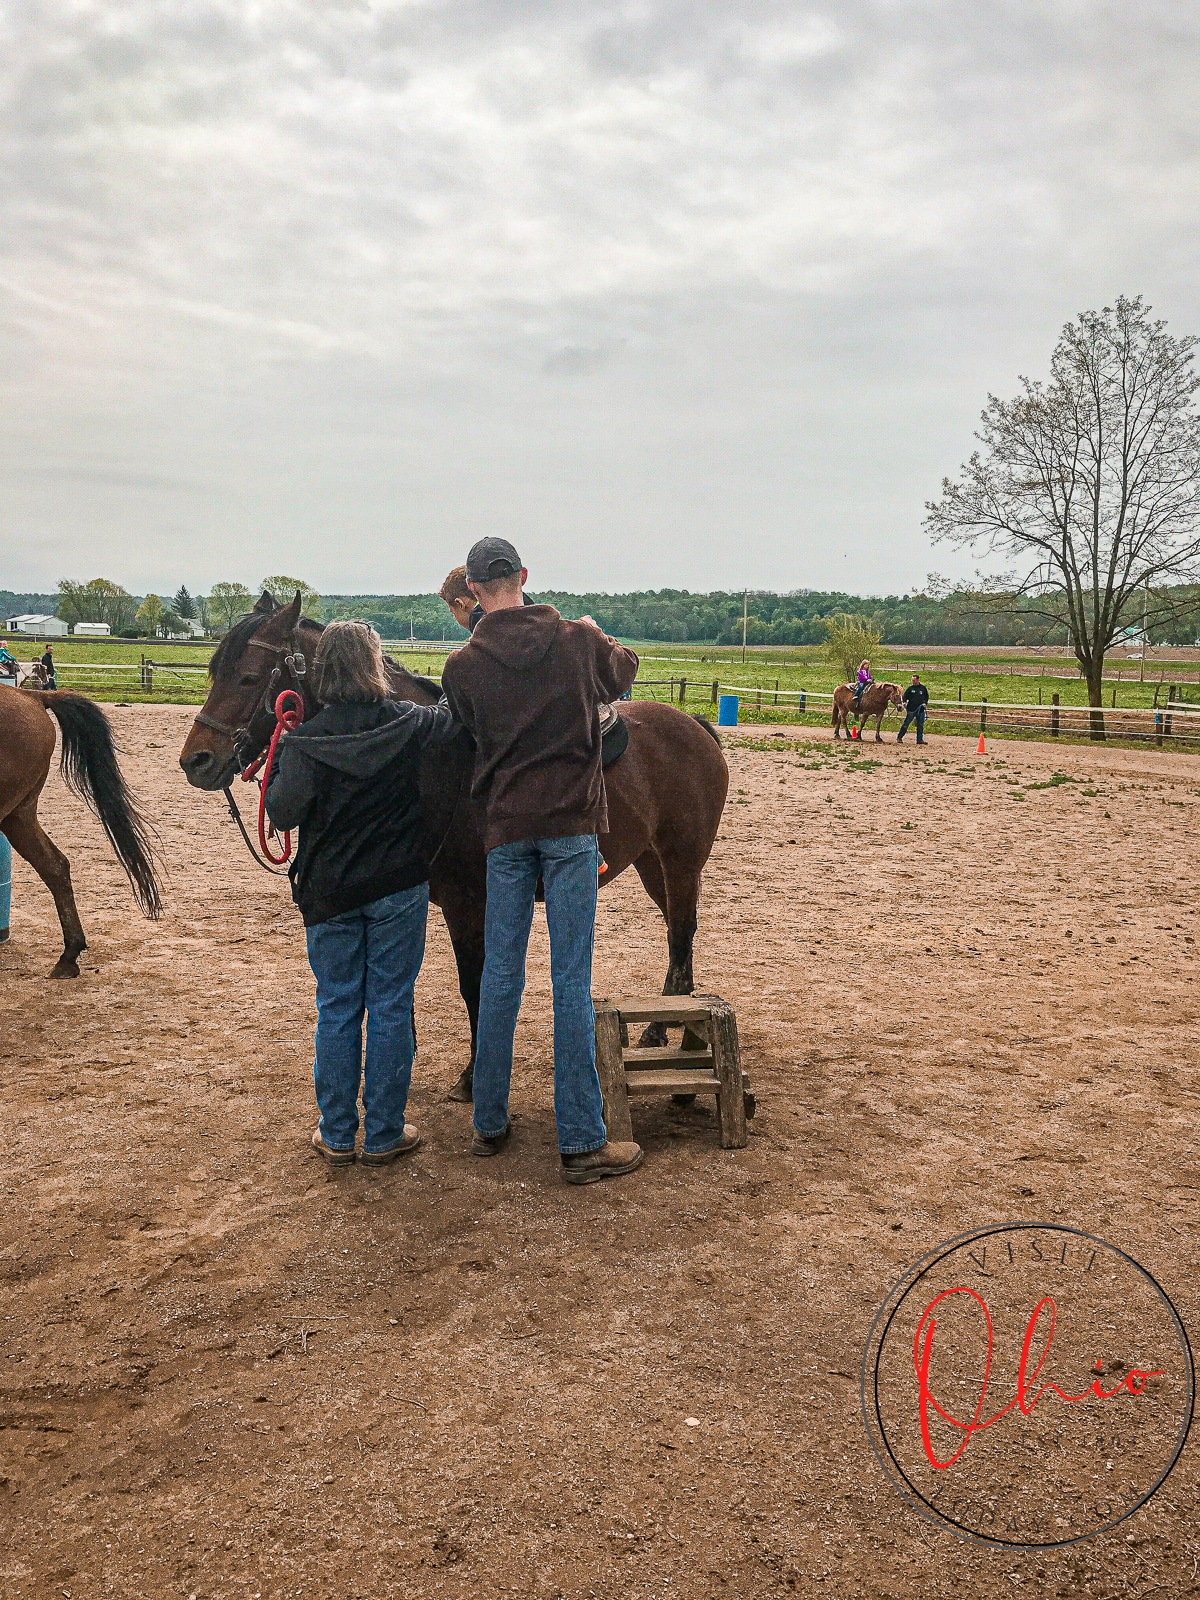 picture of a man and women helping a small child onto a small horse in a dirt arena marmon valley farms